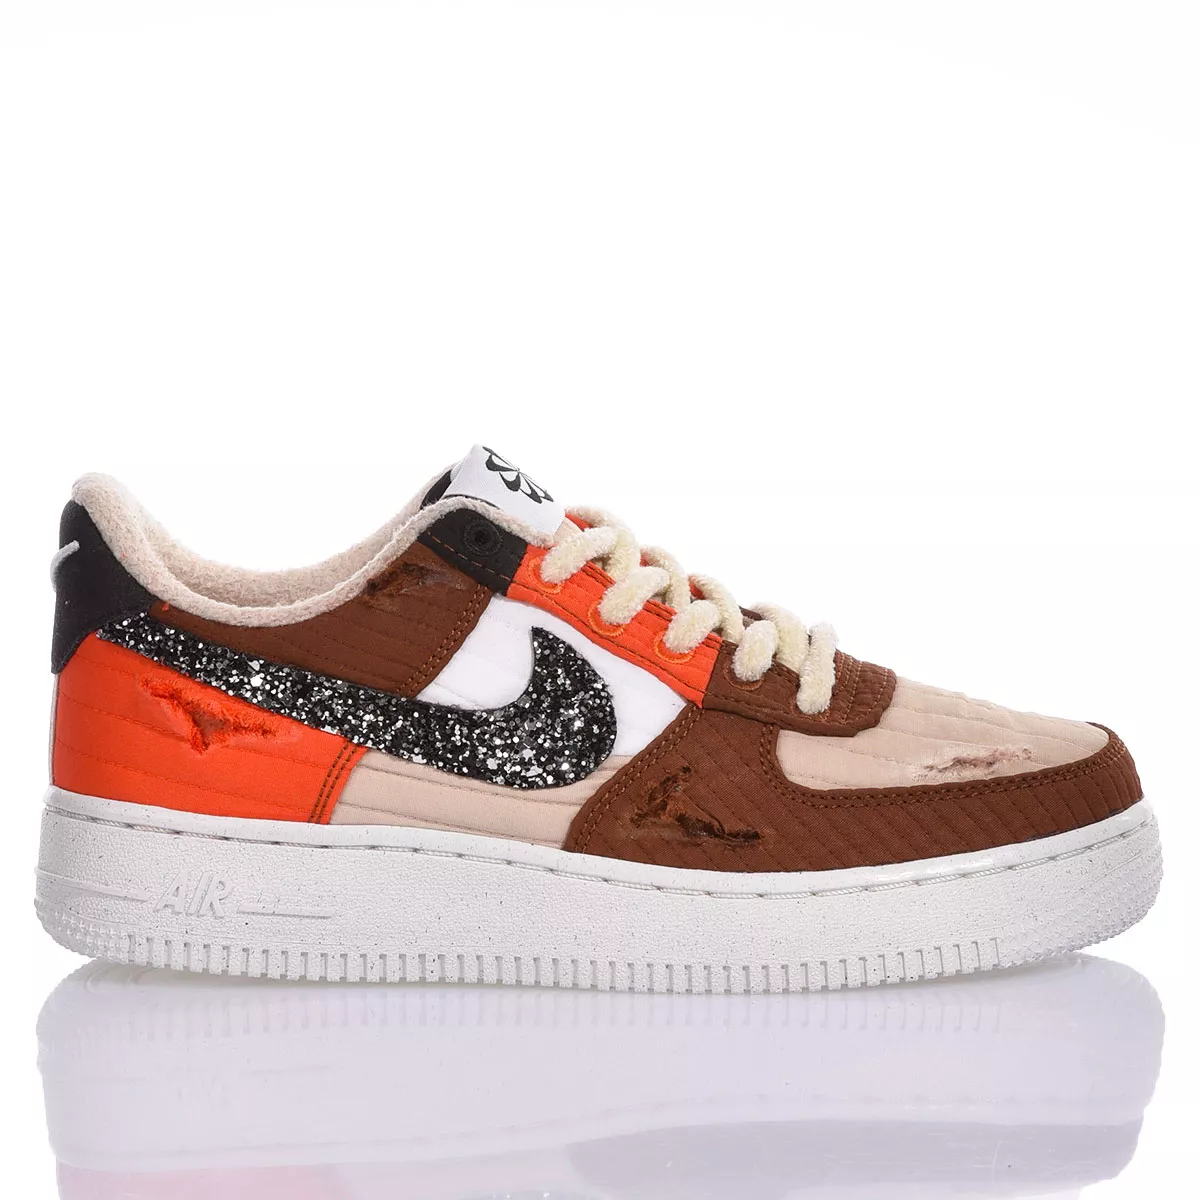 Mareo chico avance Nike Air Force 1 Chalet